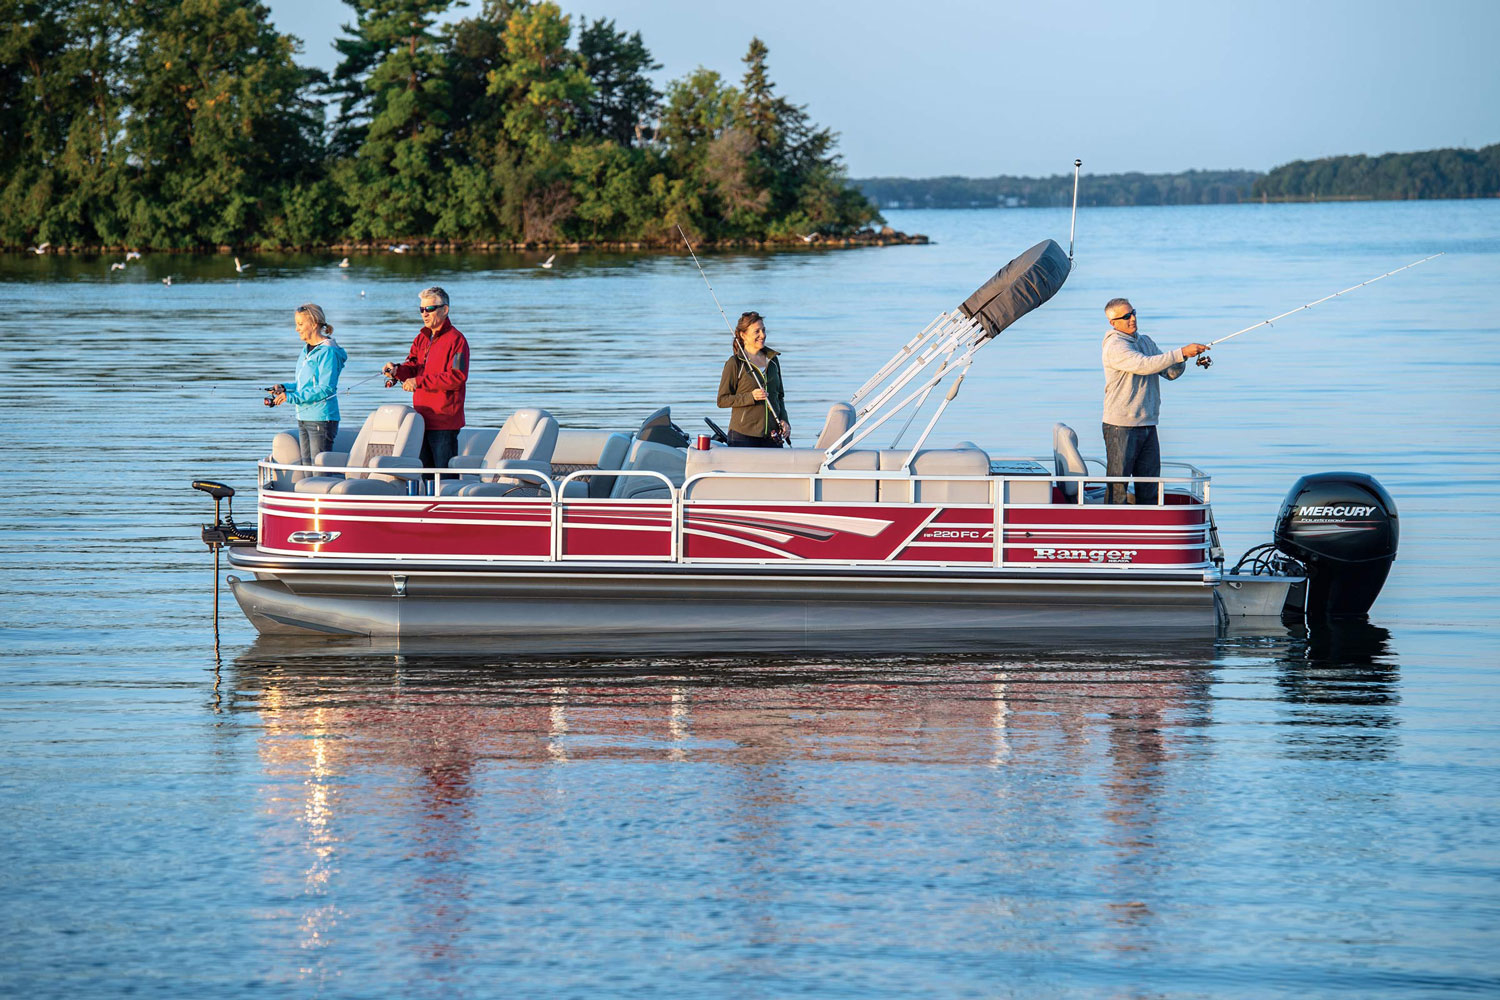 Ranger 220FC: Prices, Specs, Reviews and Sales Information - itBoat